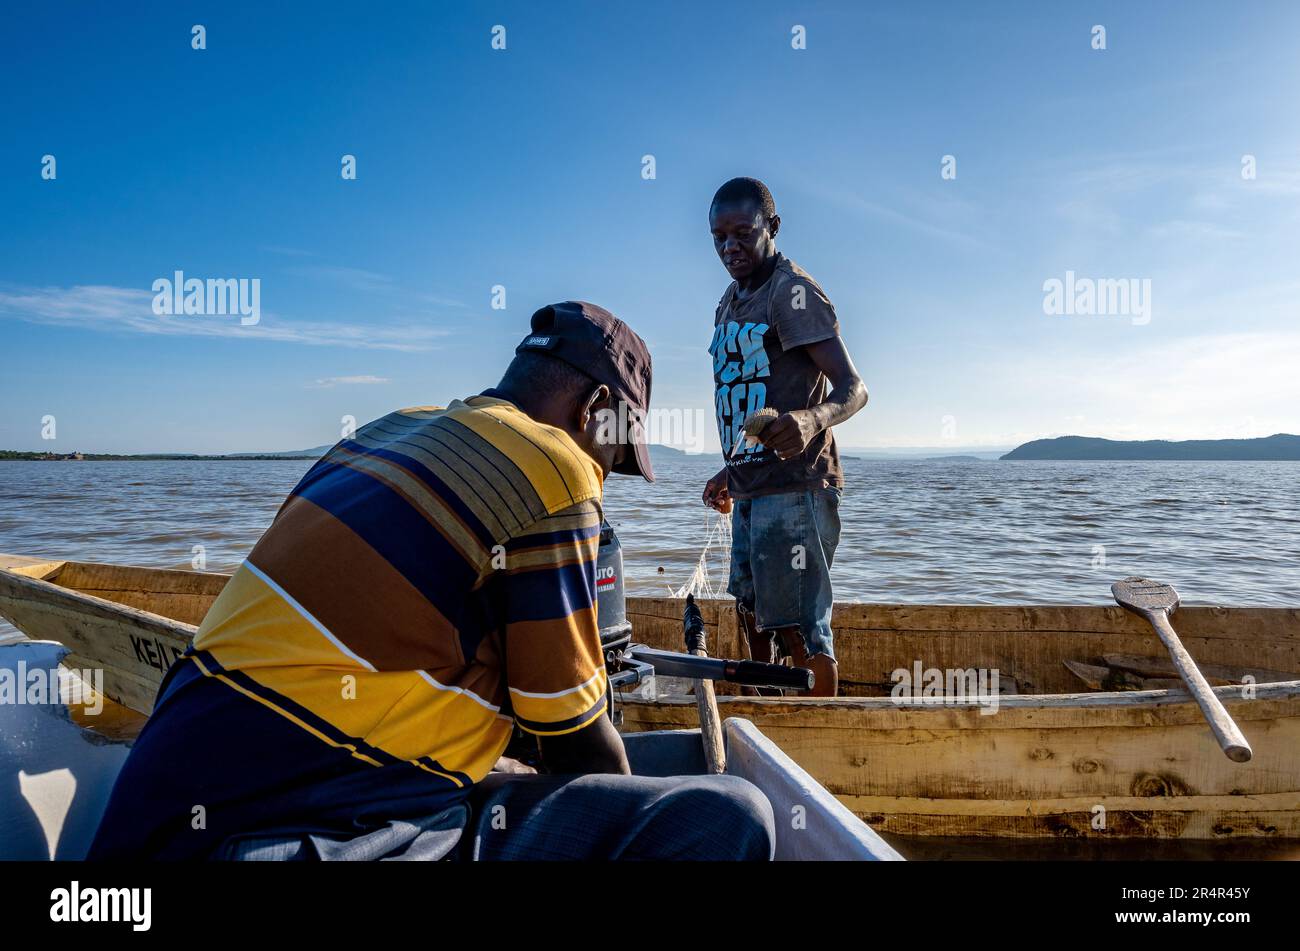 Two men fishing in a small boat on the Lake Baringo. Kenya, Africa